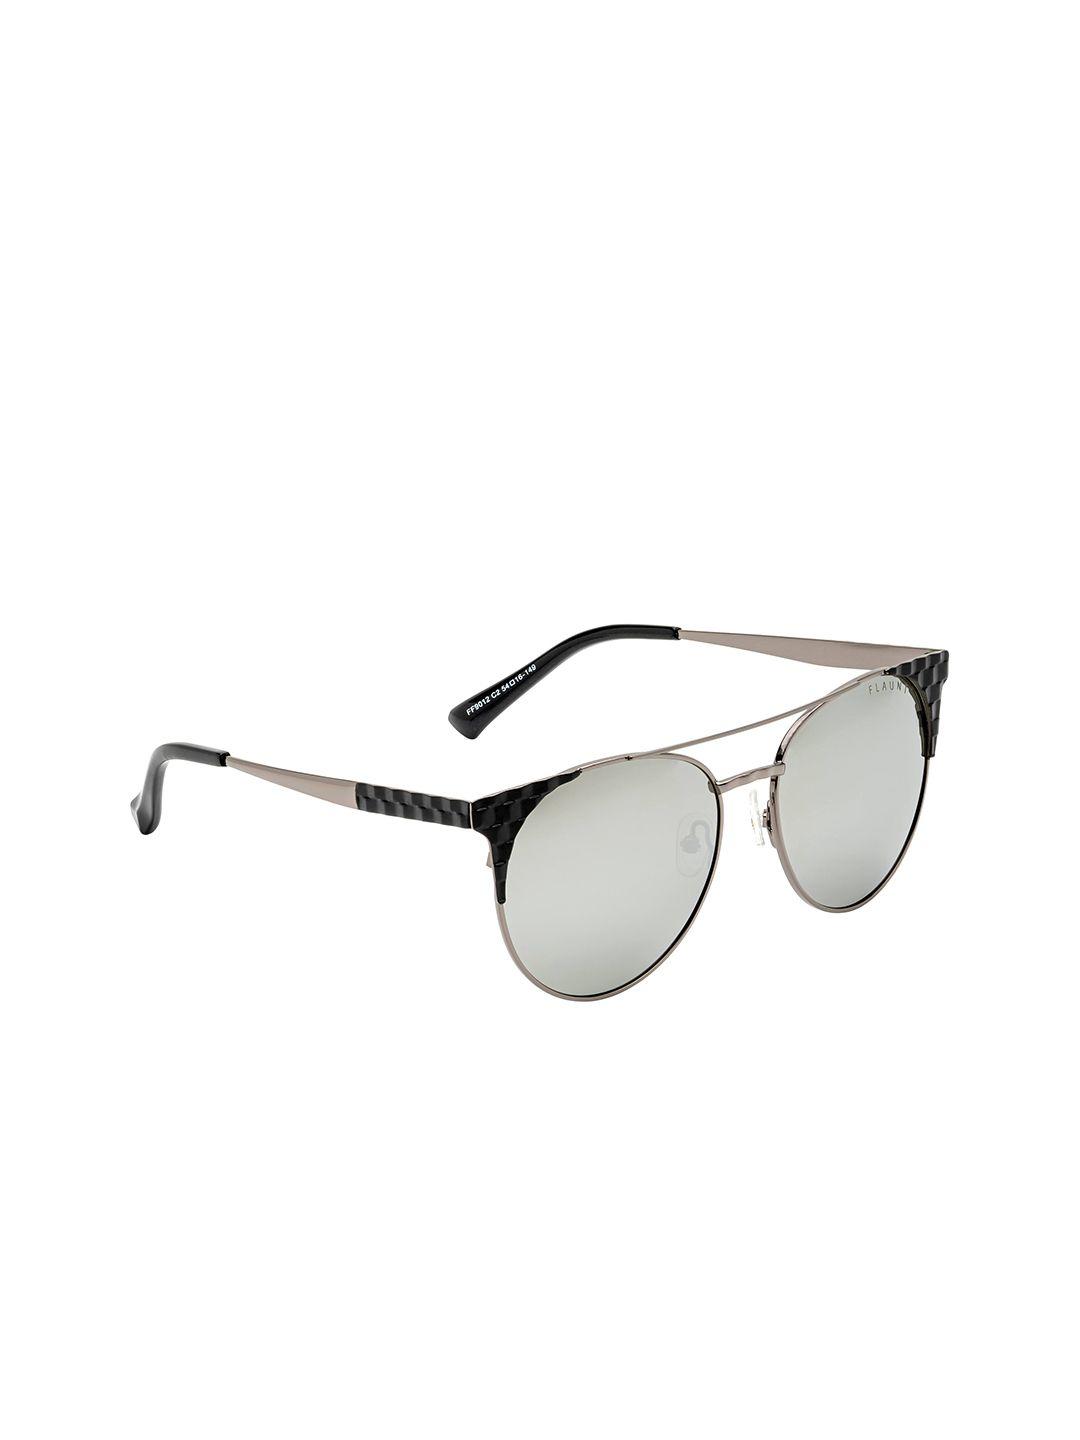 femina-flaunt-women-mirrored-lens-&-silver-oval-sunglasses-with-uv-protected-lens-ff-9012